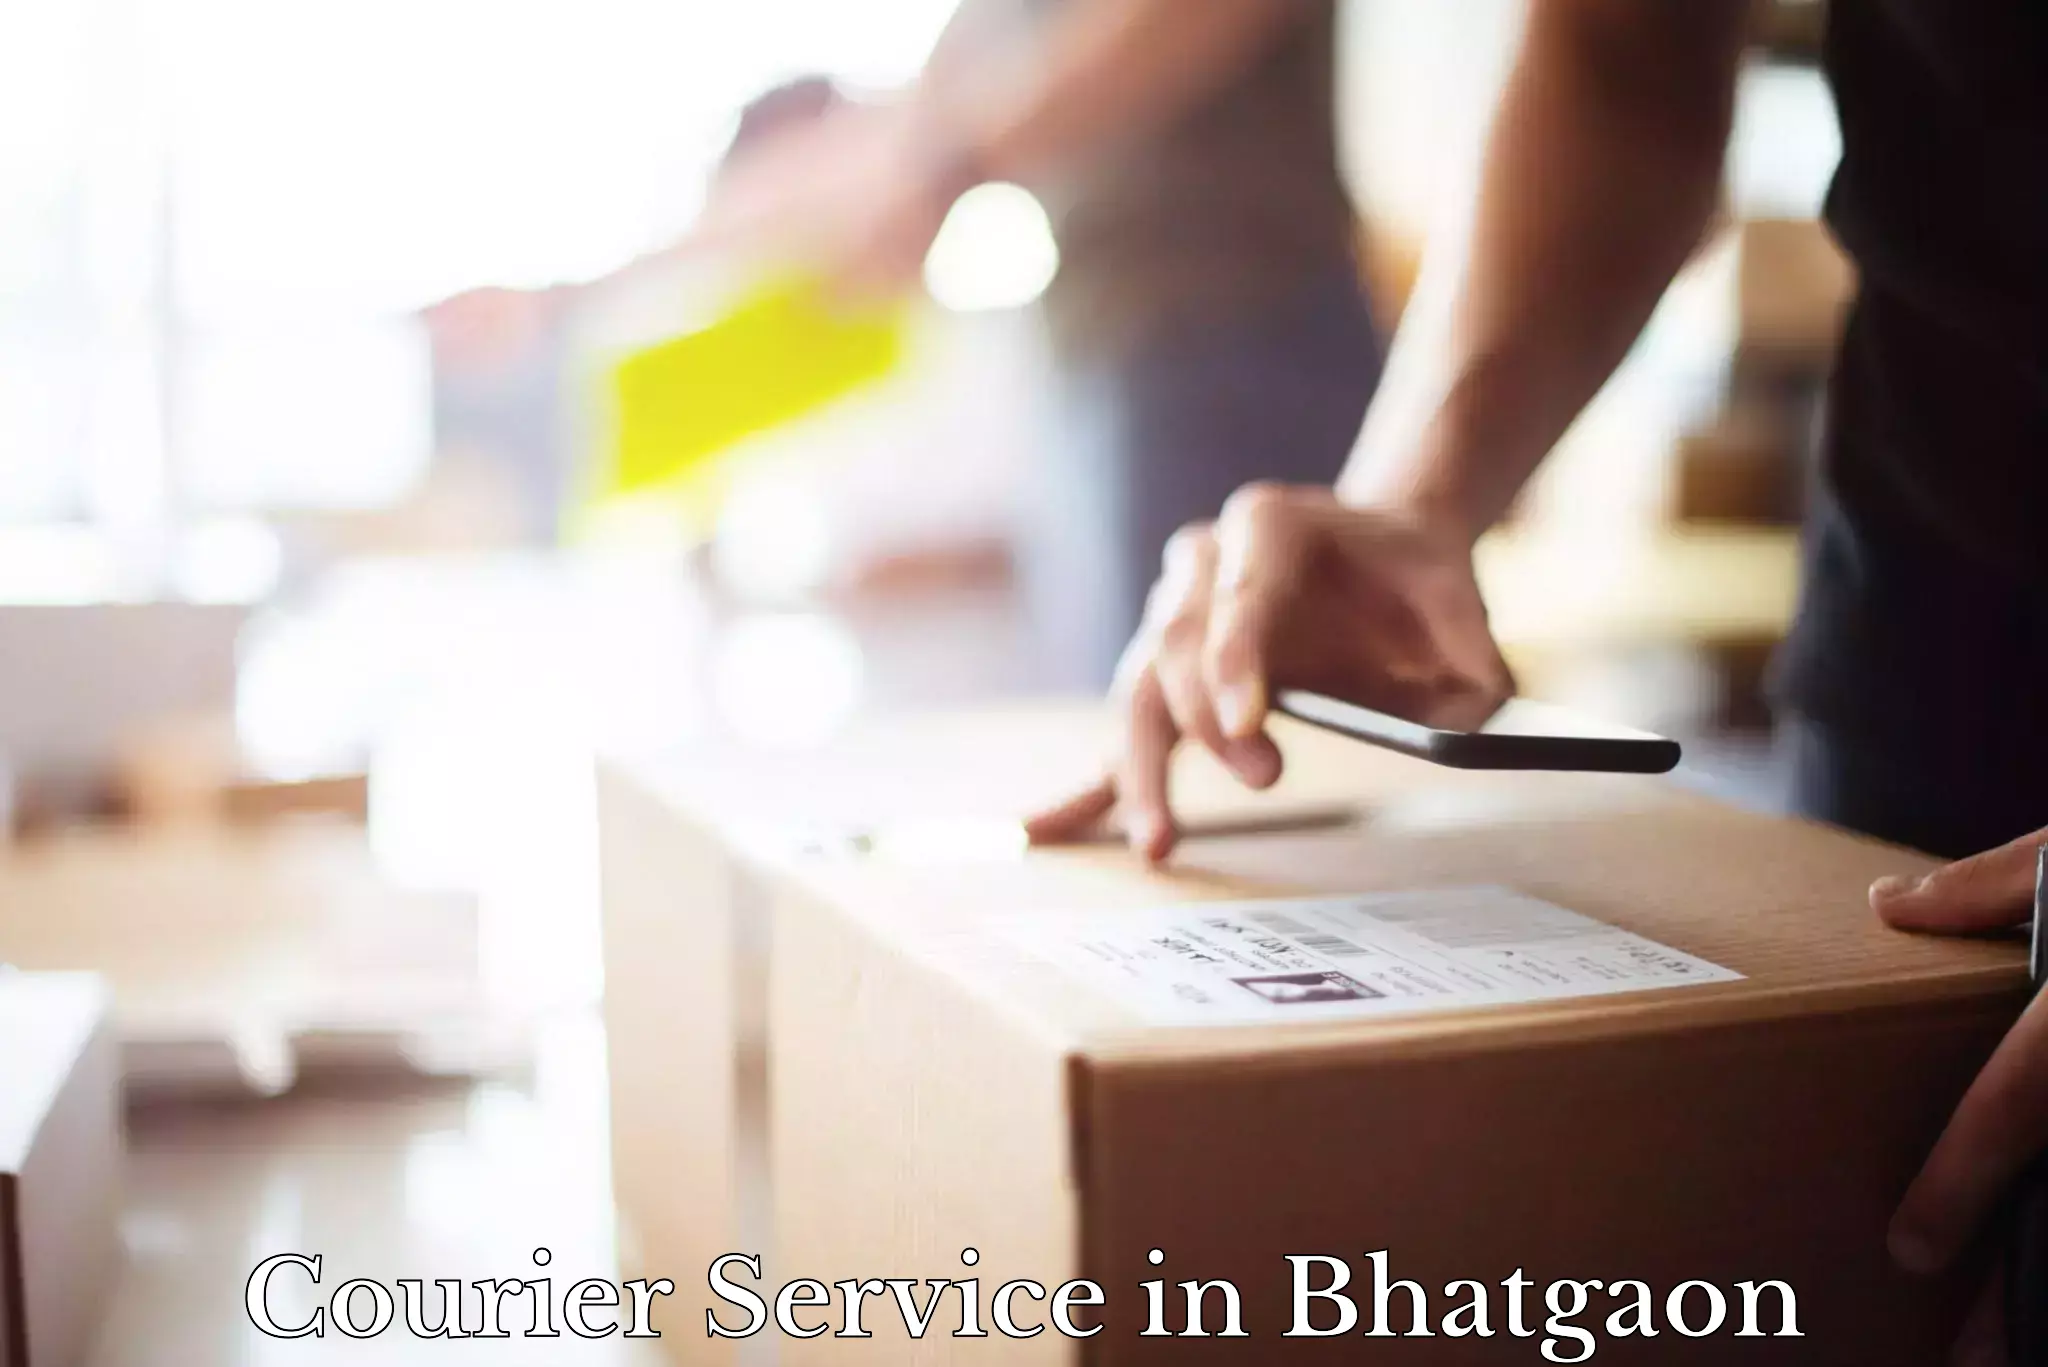 Remote area delivery in Bhatgaon